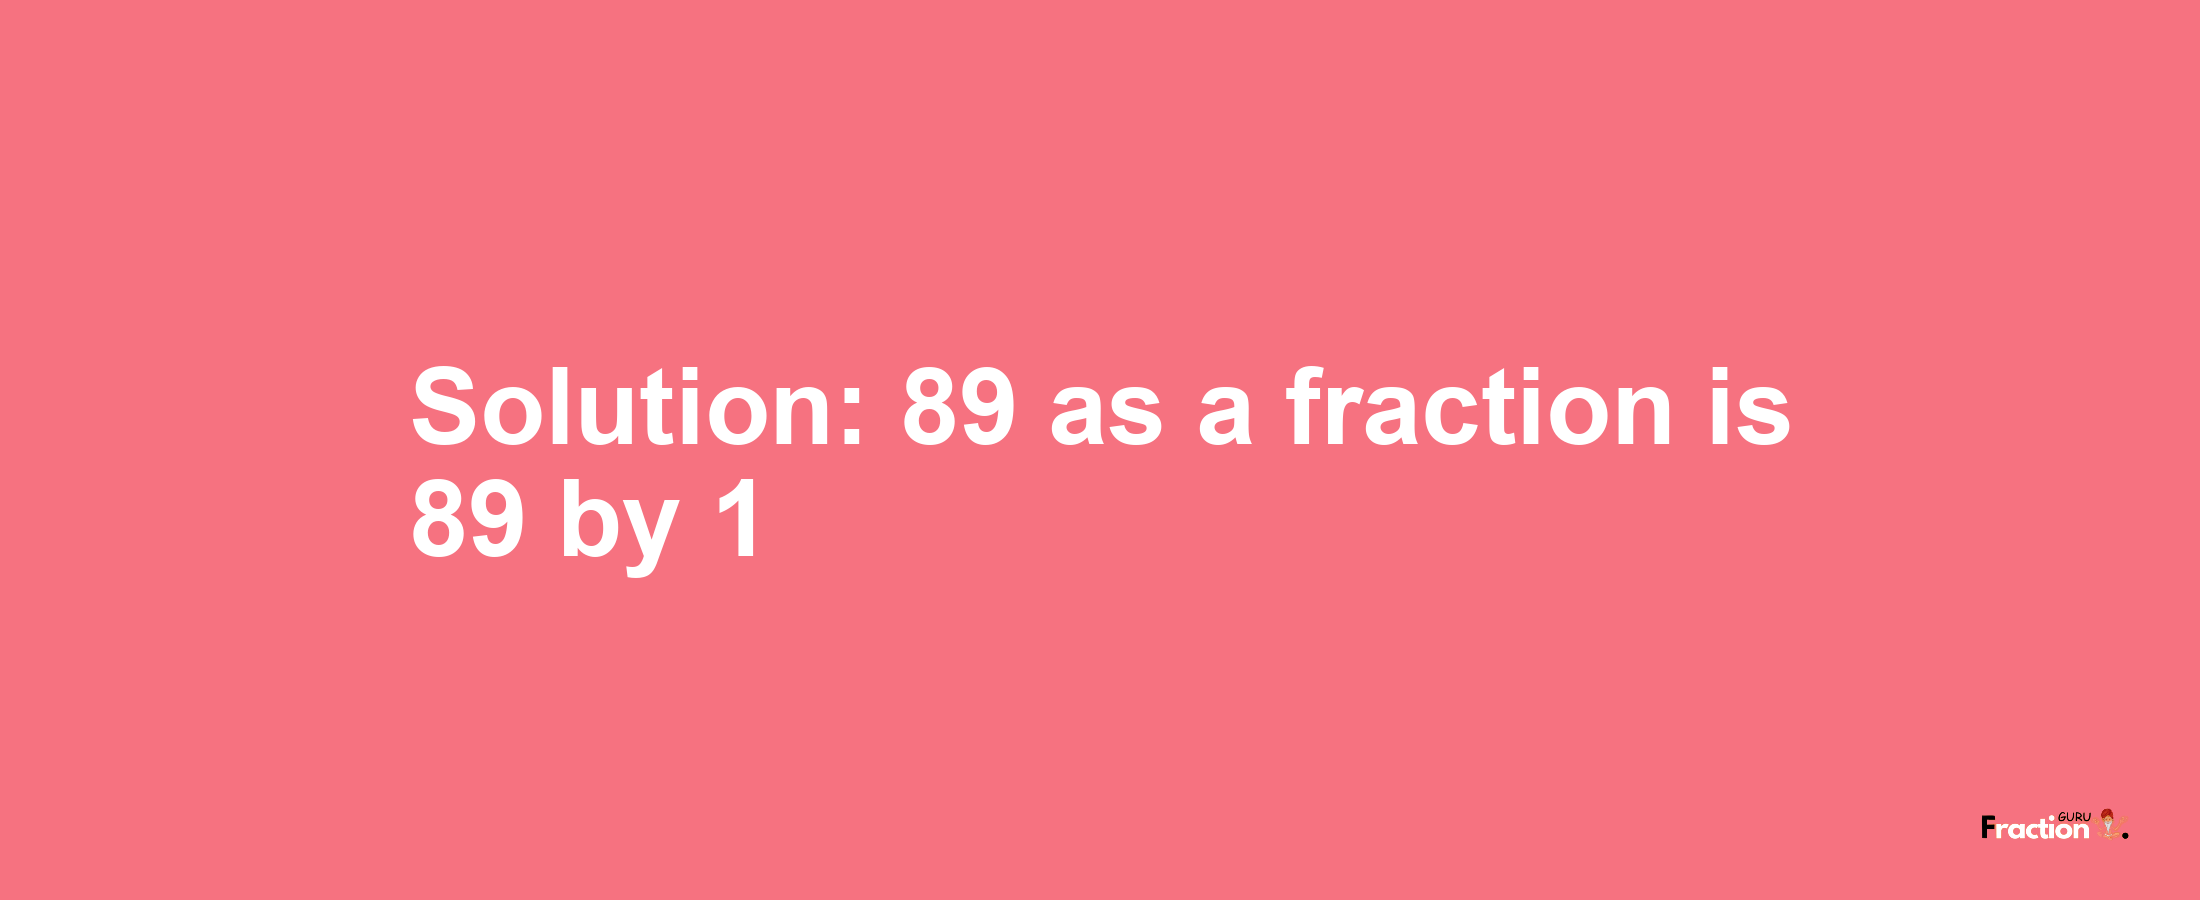 Solution:89 as a fraction is 89/1